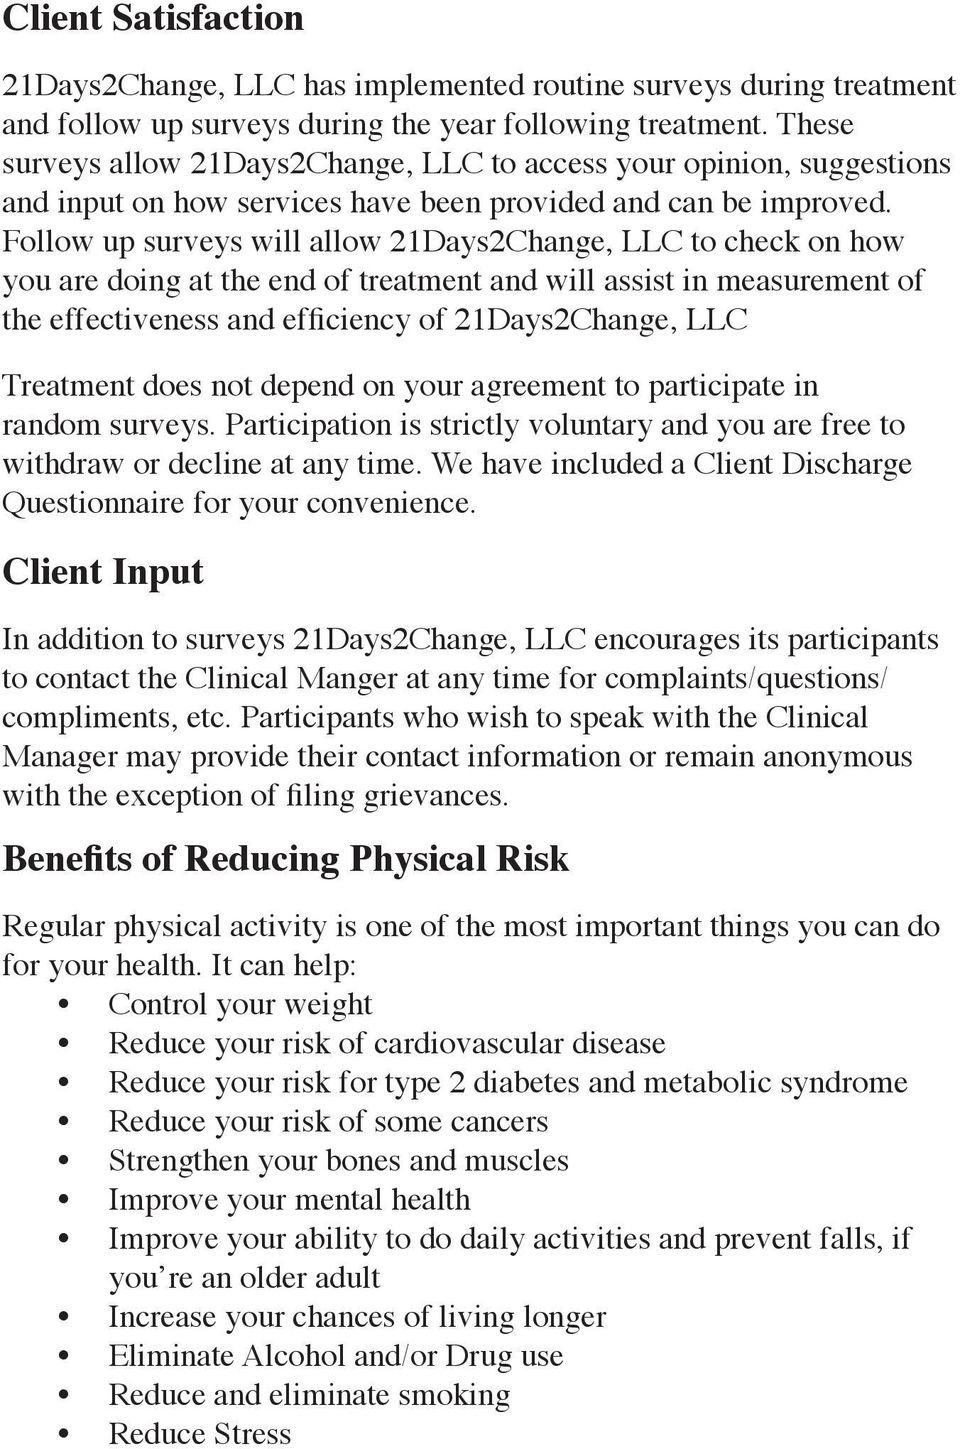 Follow up surveys will allow 21Days2Change, LLC to check on how you are doing at the end of treatment and will assist in measurement of the effectiveness and efficiency of 21Days2Change, LLC